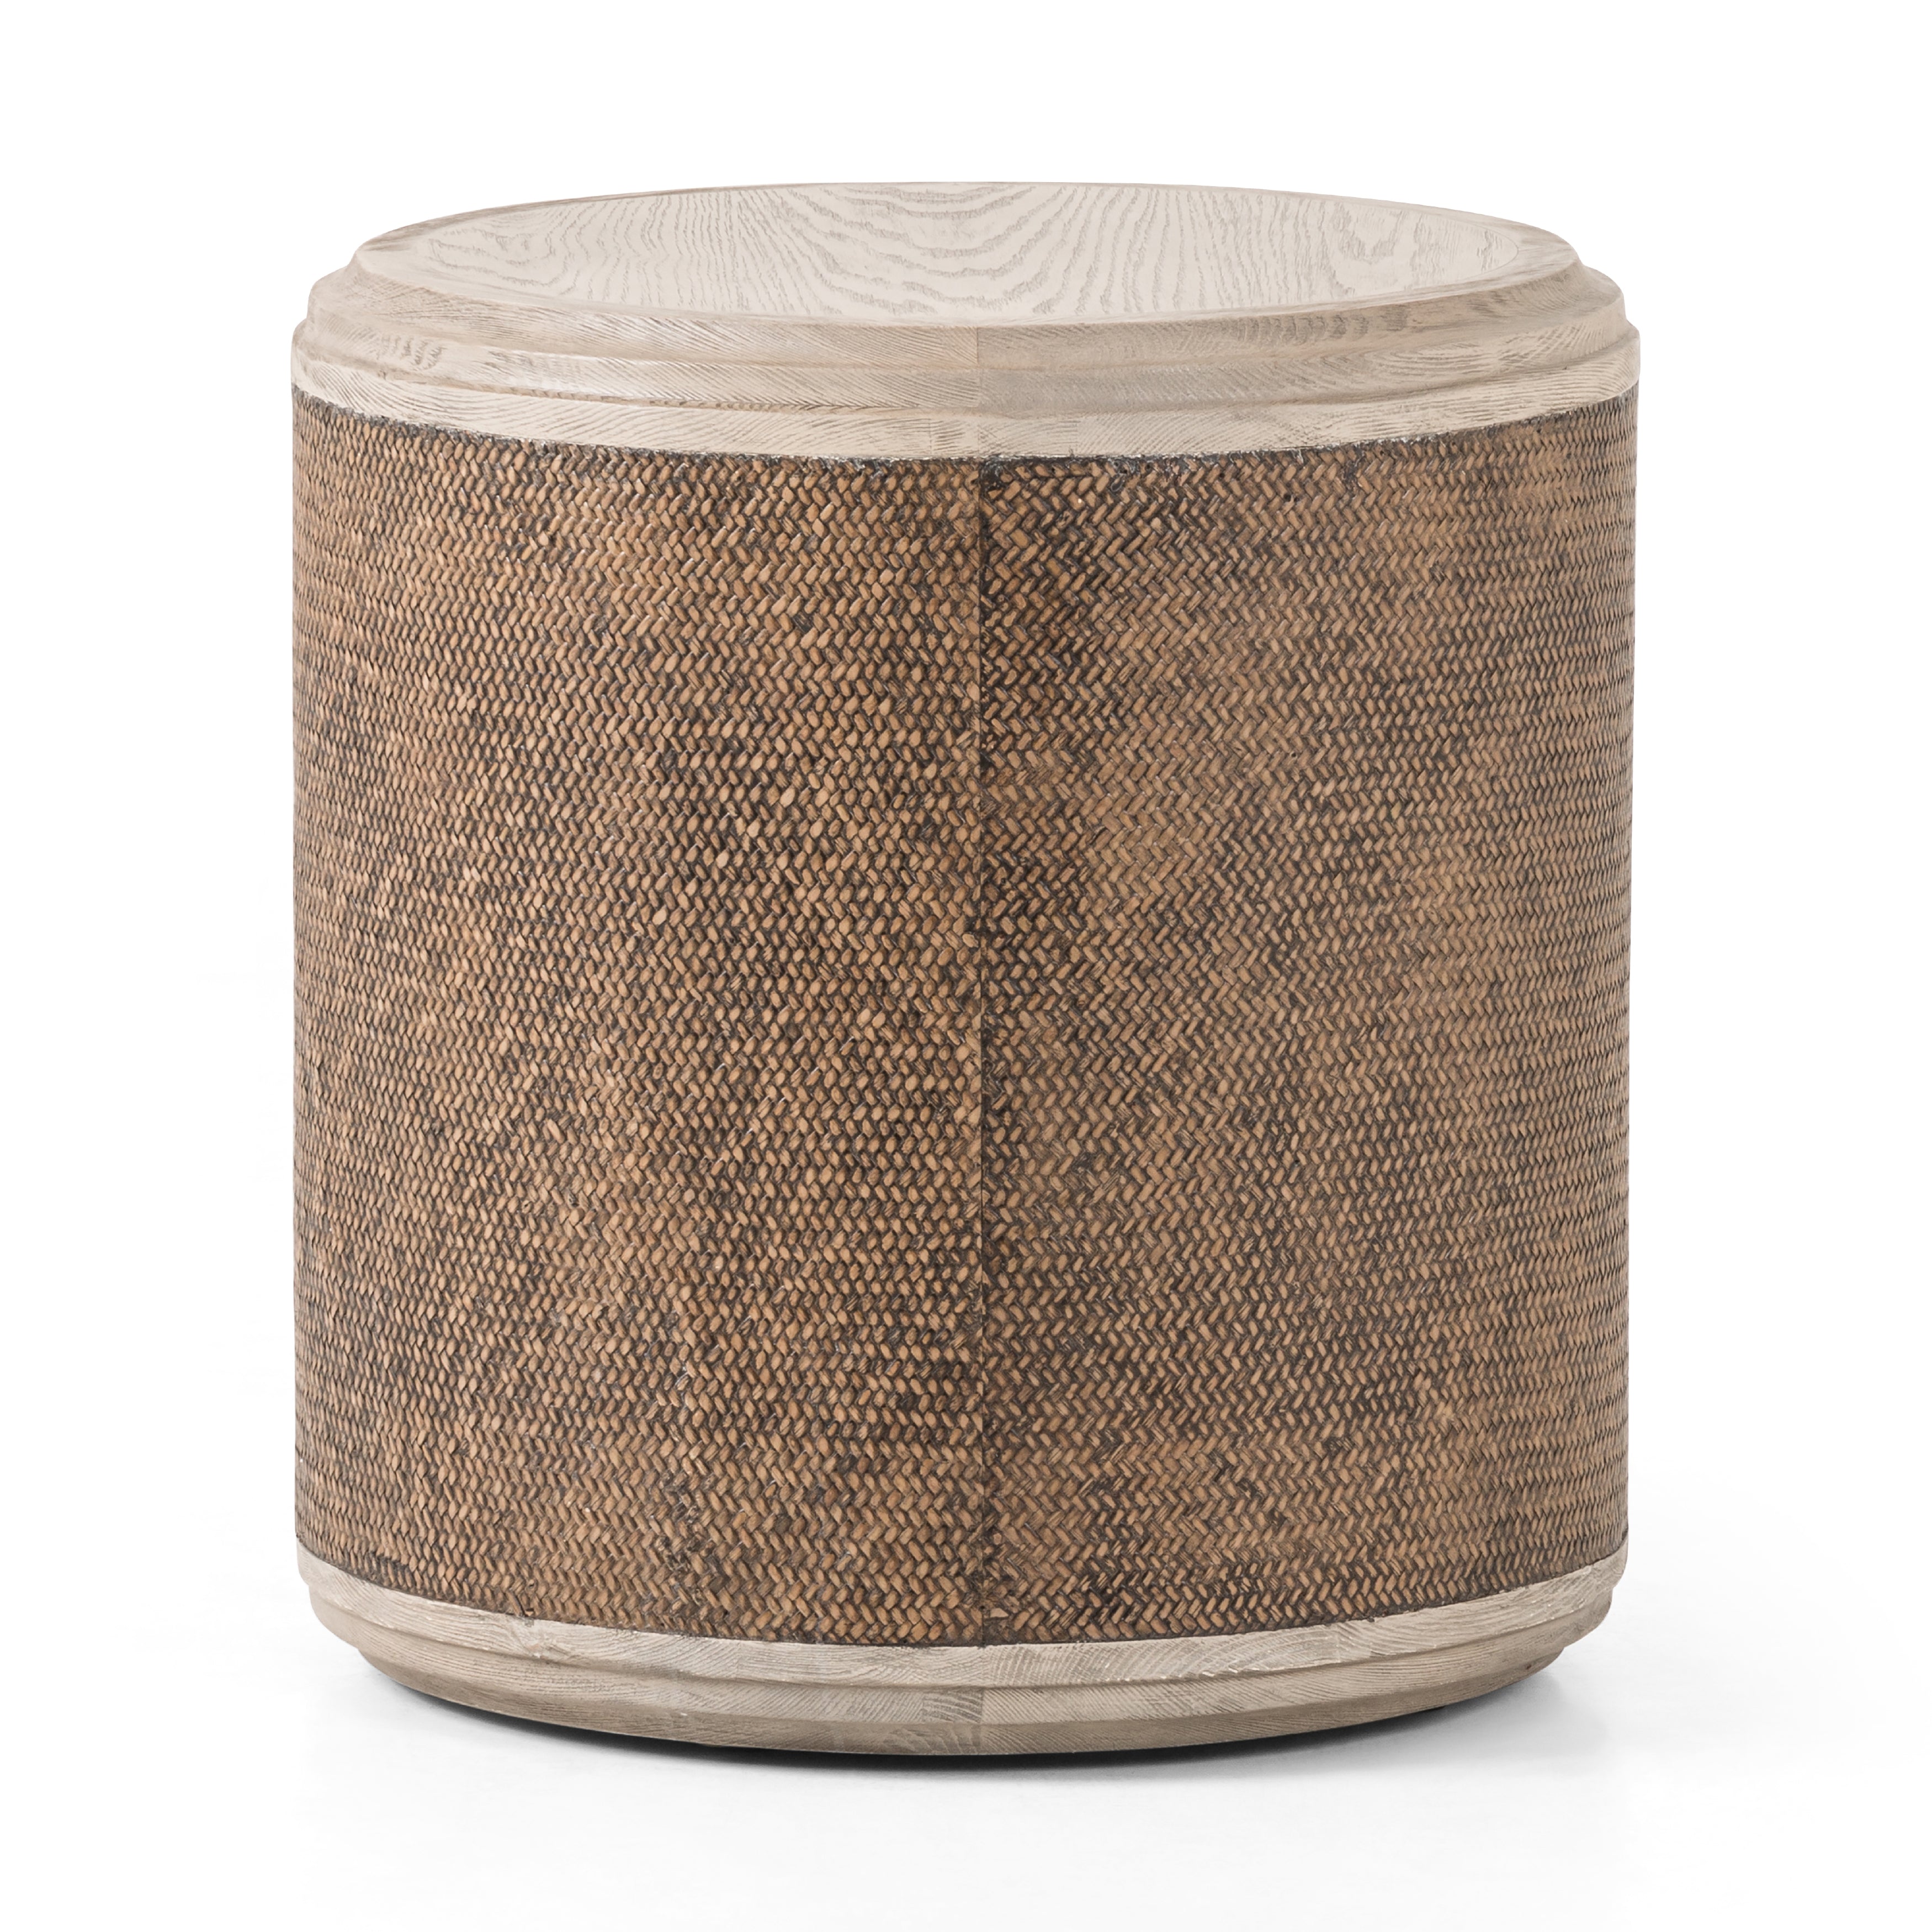 The Kiara End Table is crafted from durable solid pine and weathered blonde oak veneer for long-lasting quality. Its weathered blonde finish and rustic rattan accents provide a rustic yet modern aesthetic for any space. Perfect for any room in the house. Amethyst Home provides interior design, new home construction design consulting, vintage area rugs, and lighting in the Miami metro area.